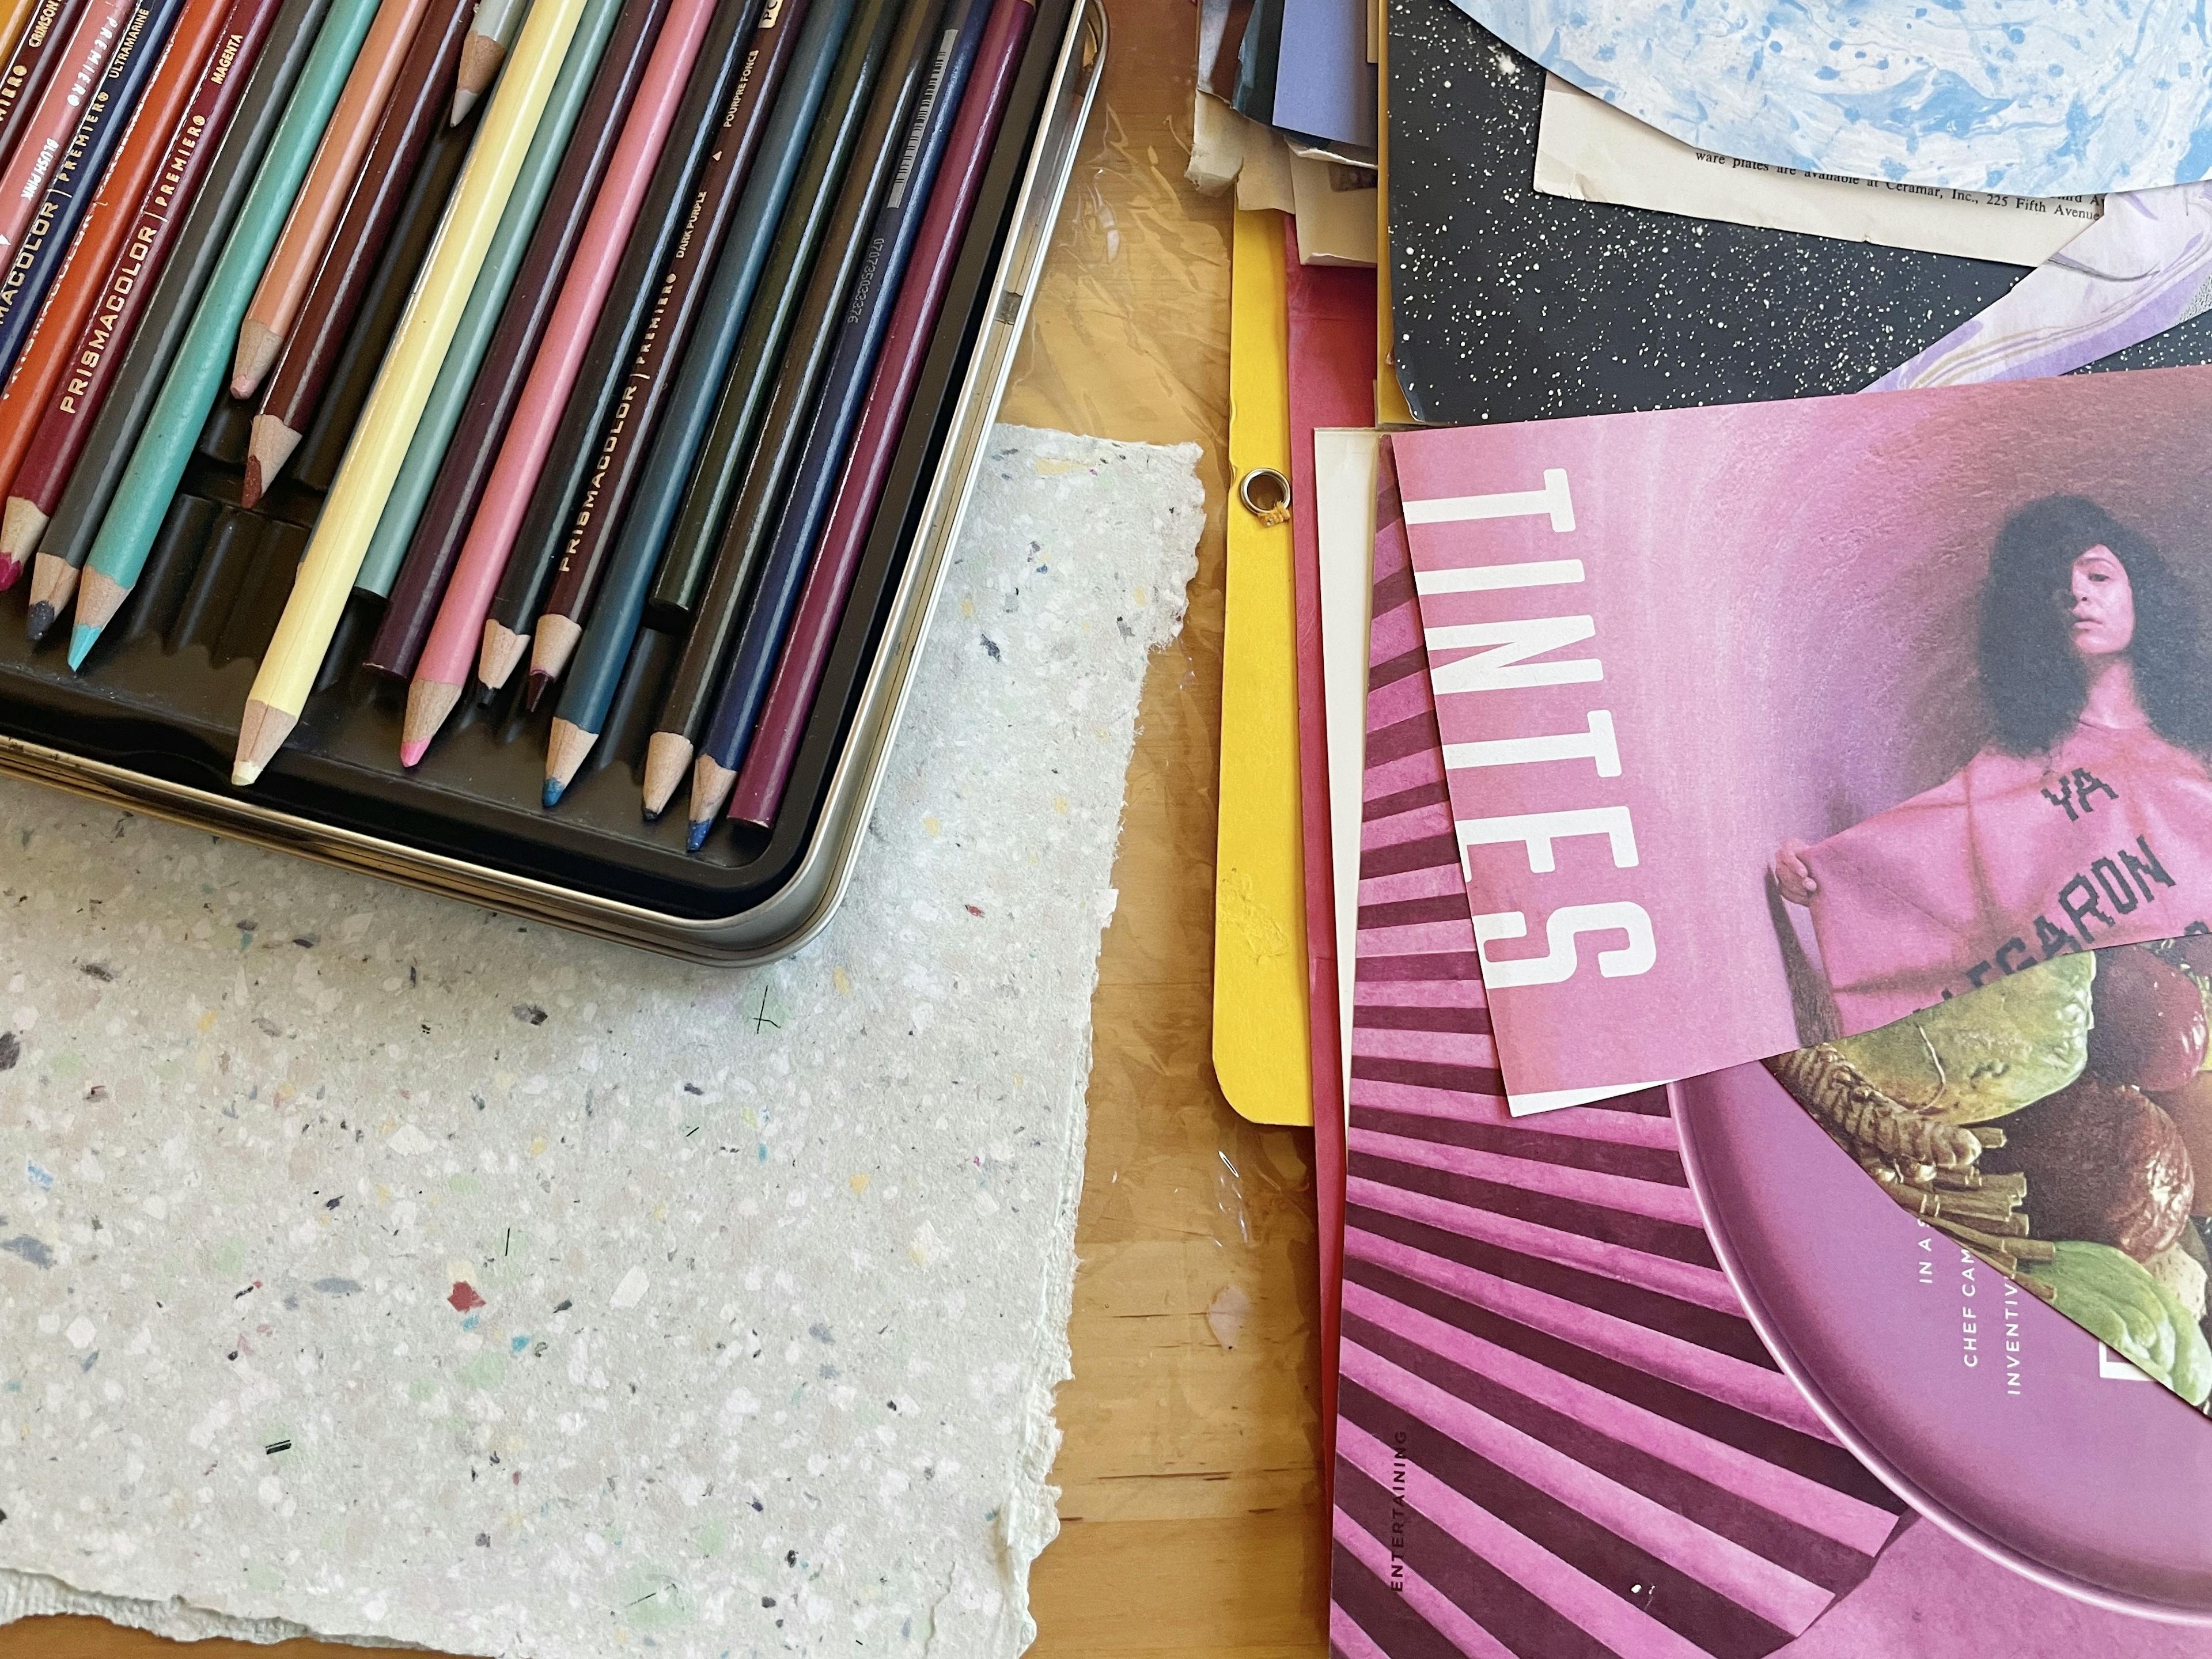 A box of colored pencils and stacks of magazines in artist Xochi Solis' studio.